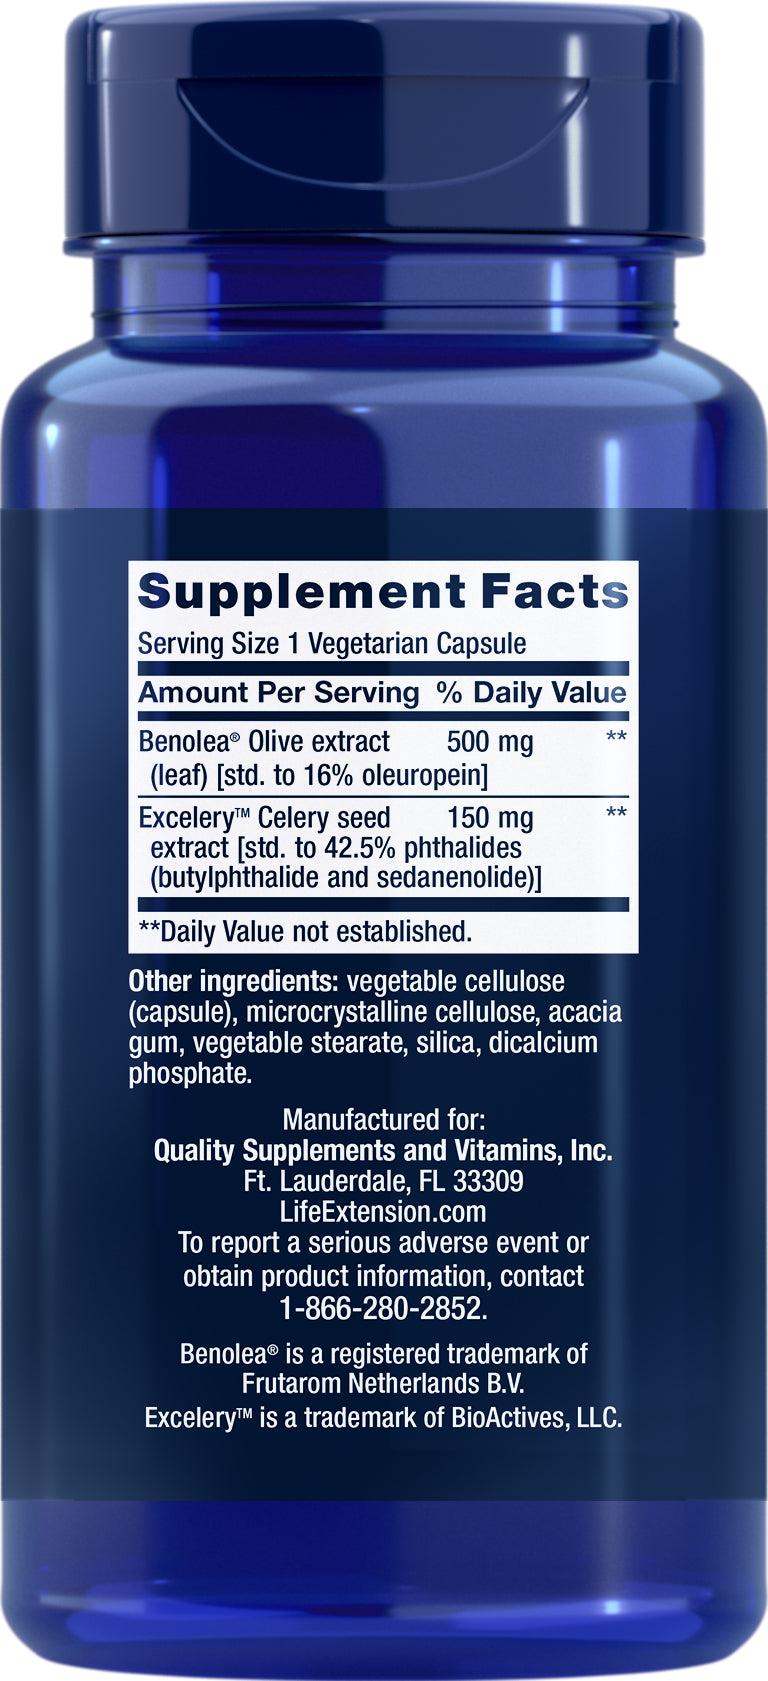 Advanced Olive Leaf Vascular Support 60 veg caps by Life Extension